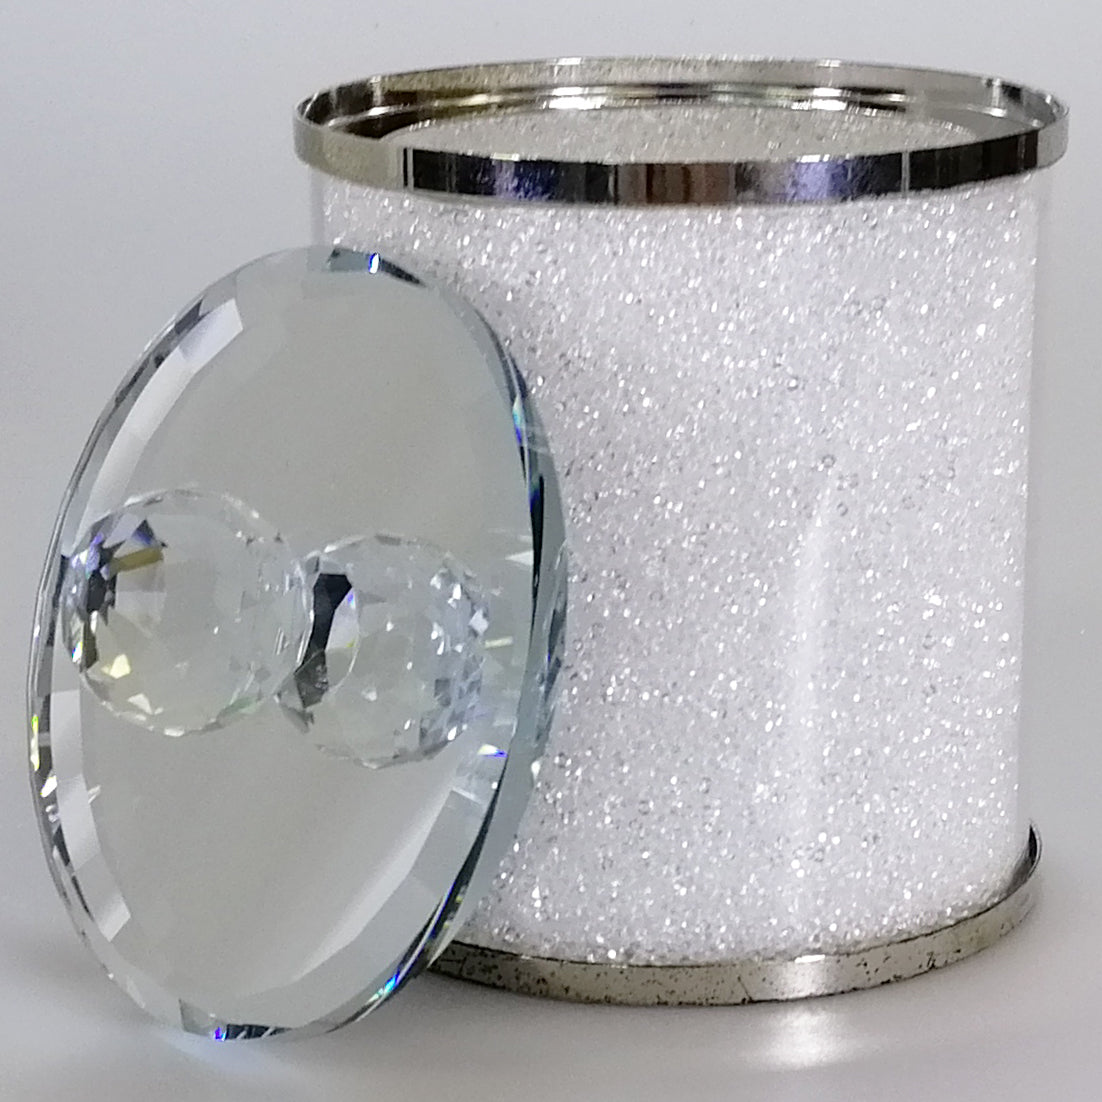 White Glass Canister